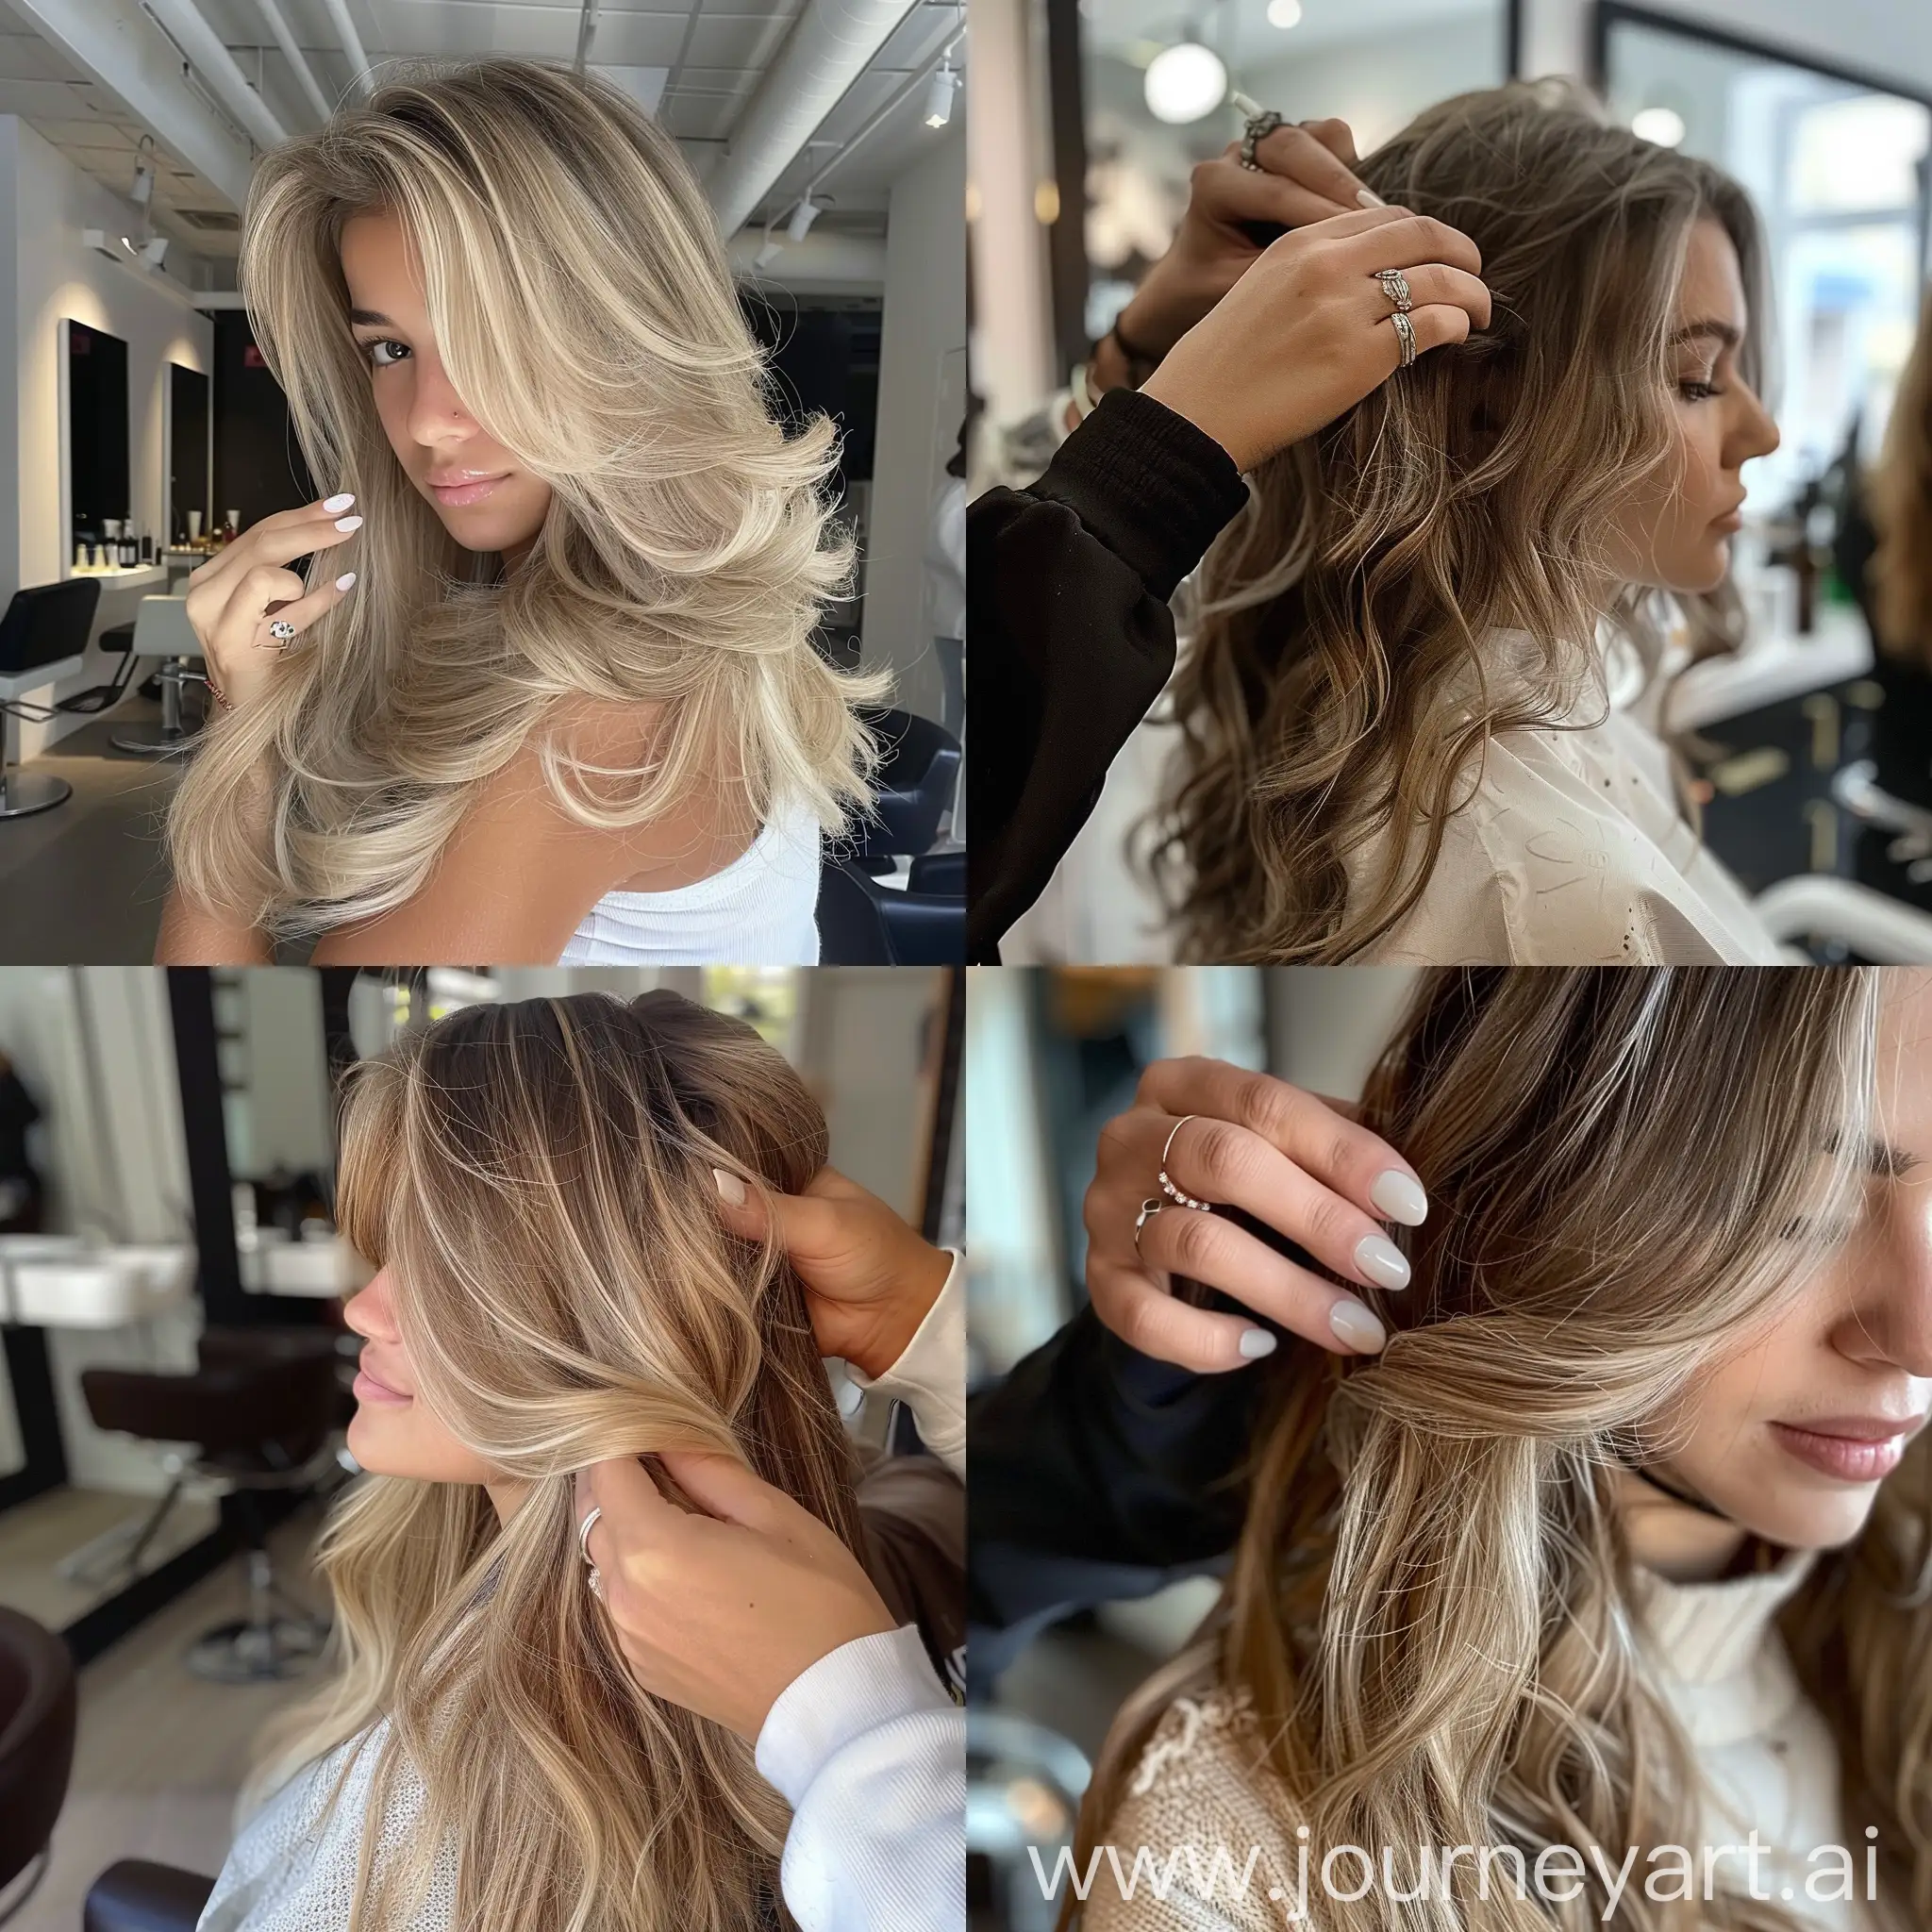 Stylish-Teen-with-Ombre-Hair-in-Salon-Modern-Beauty-Scene-with-Gel-Nails-and-Wedding-Ring